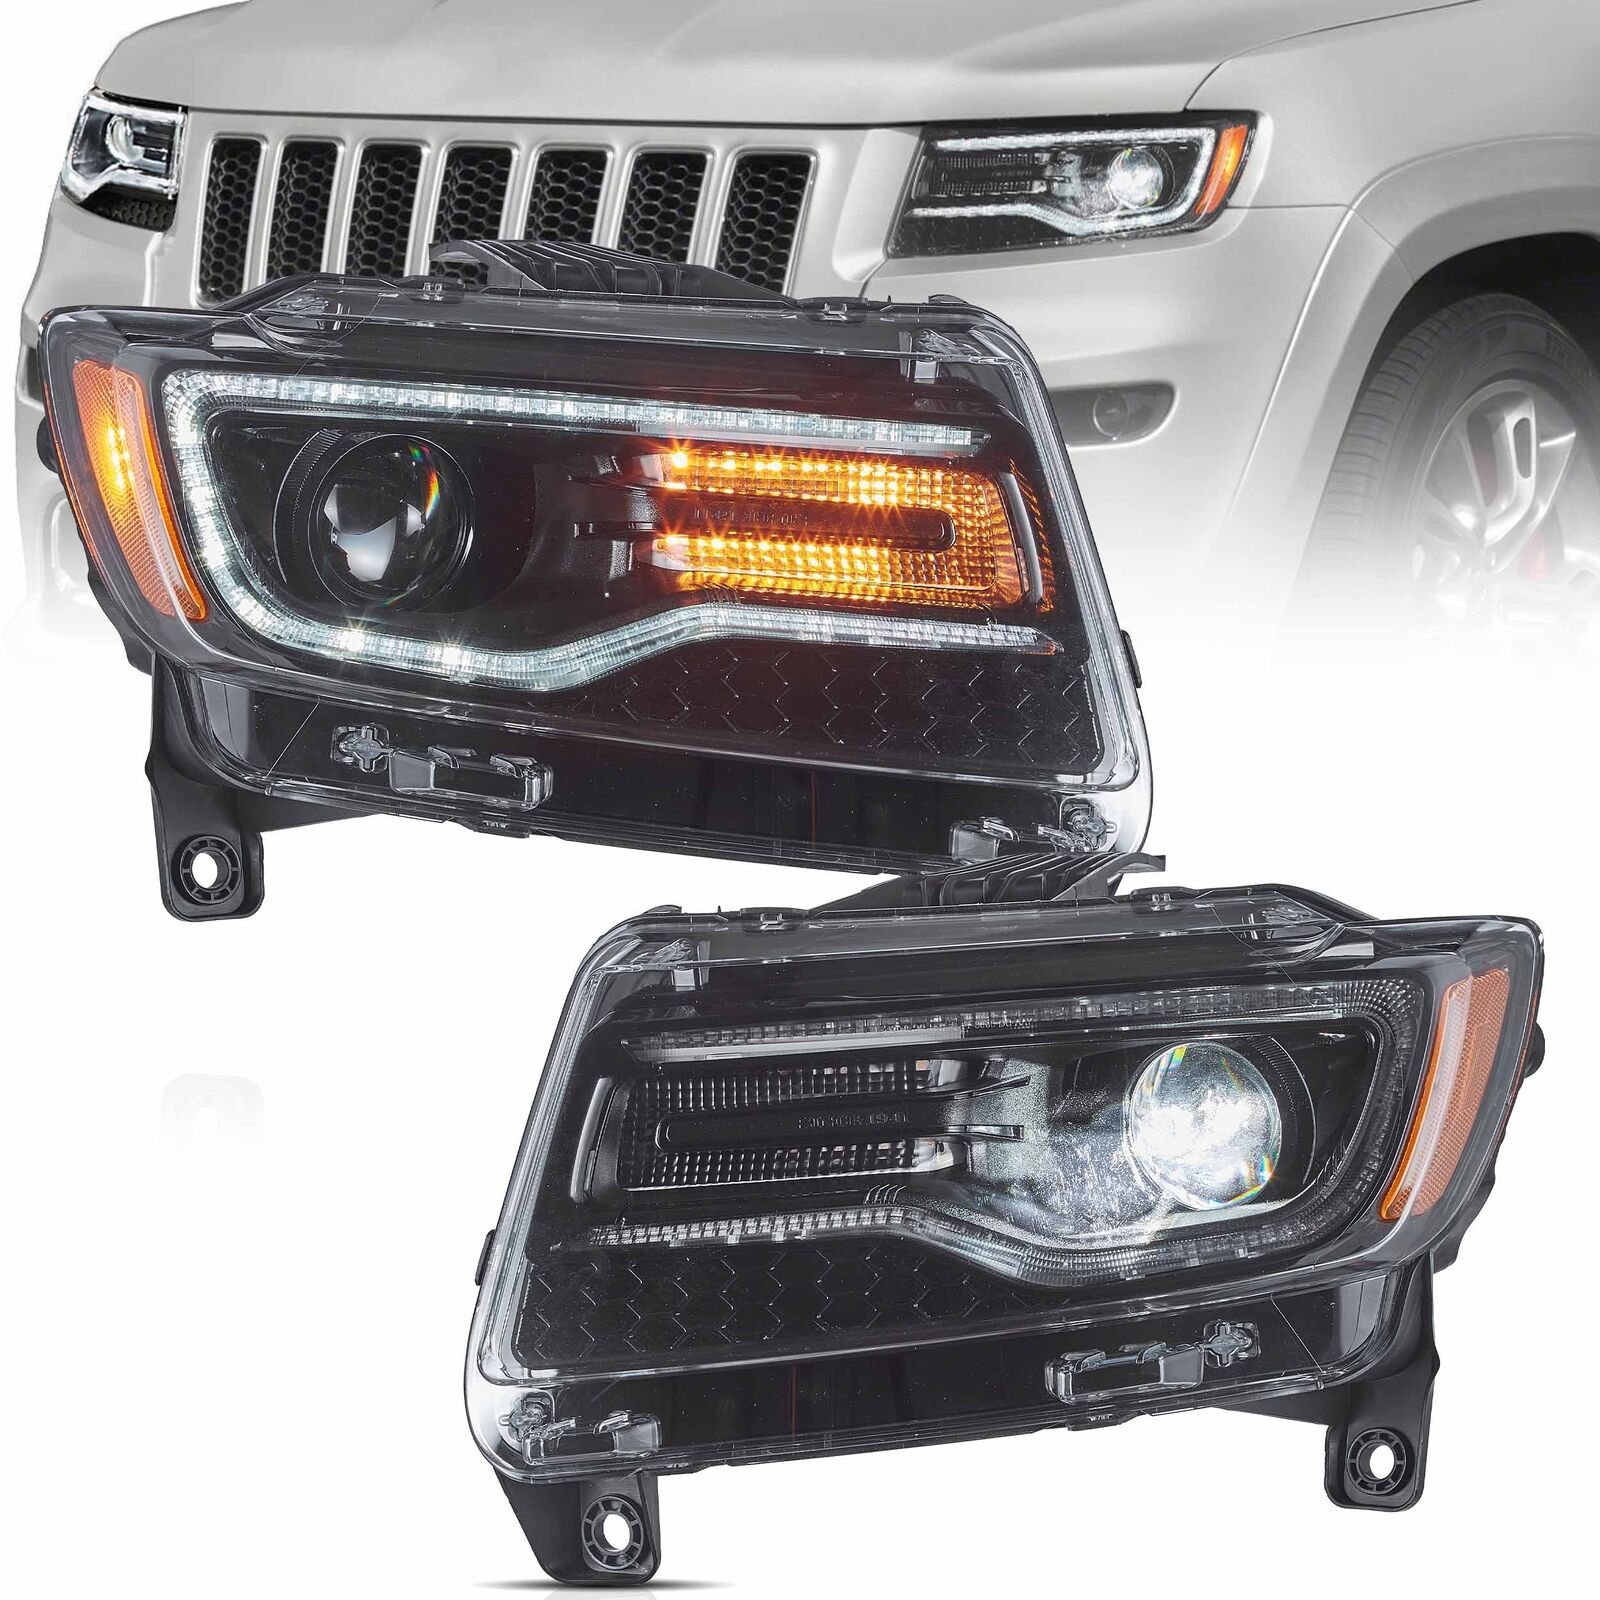 VLAND Headlight Projector LED For 2011-13 Jeep Grand Cherokee W/Blue Animation